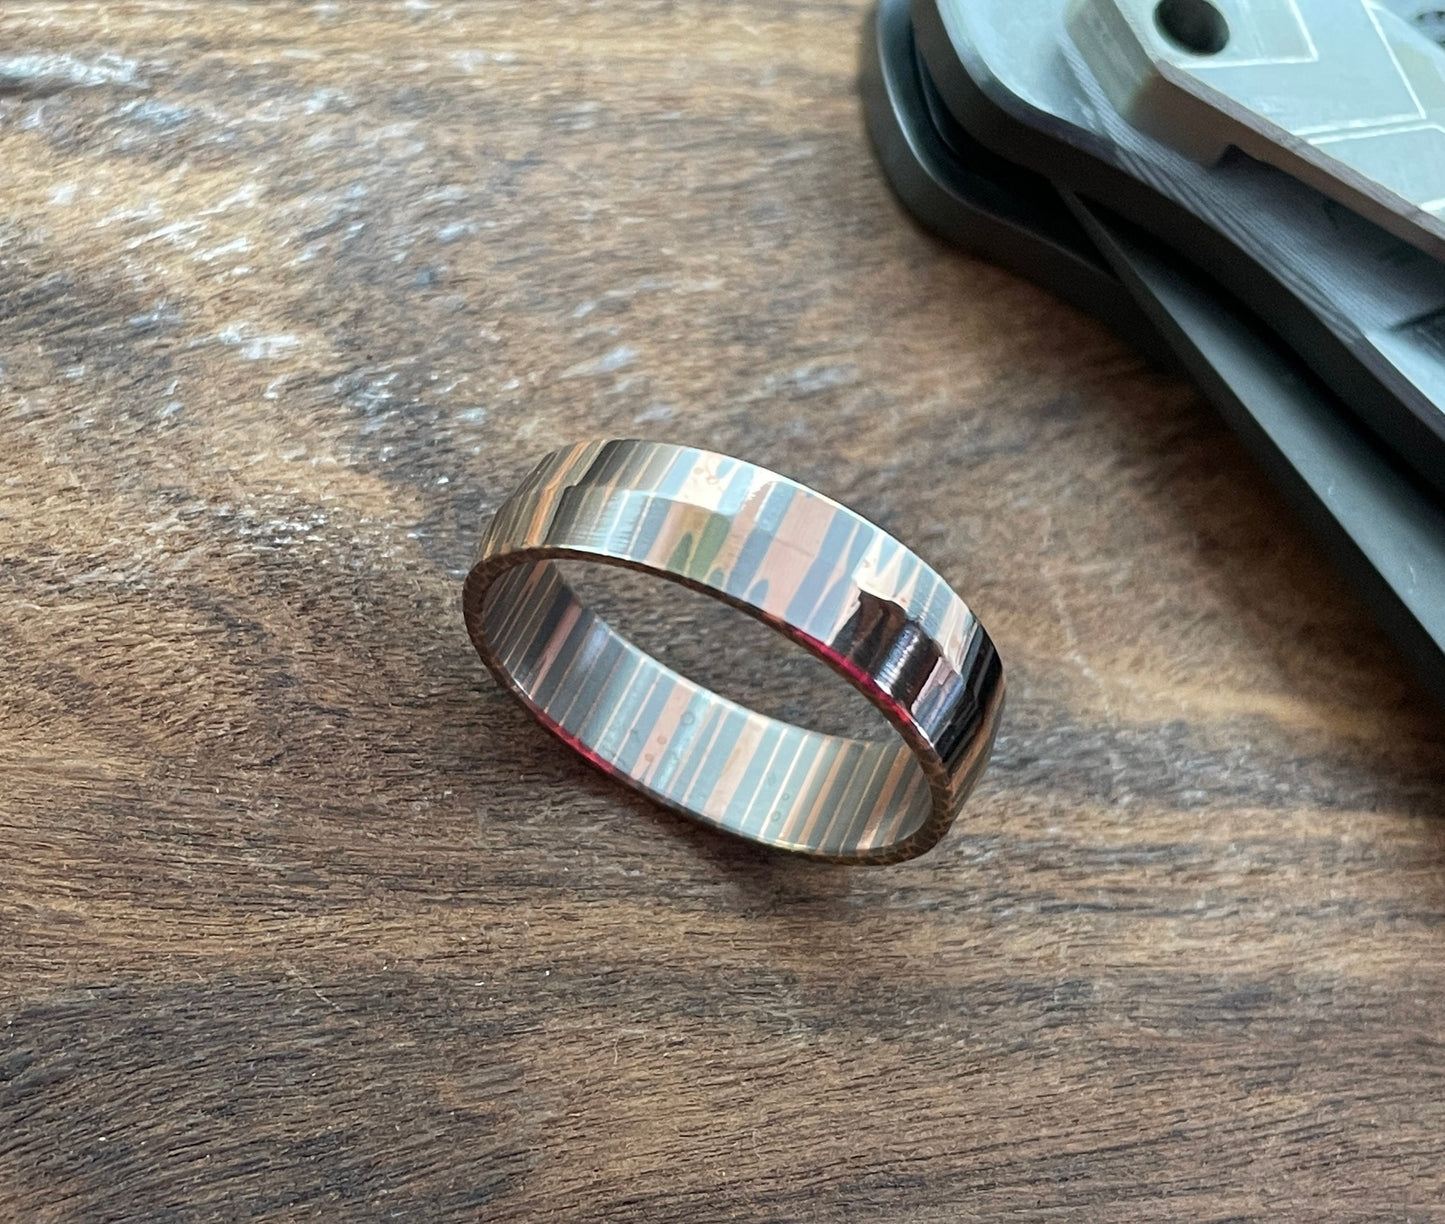 Mens RING Polished Superconductor / ZircuTi Custom EDC Every Day Carry Jewelry